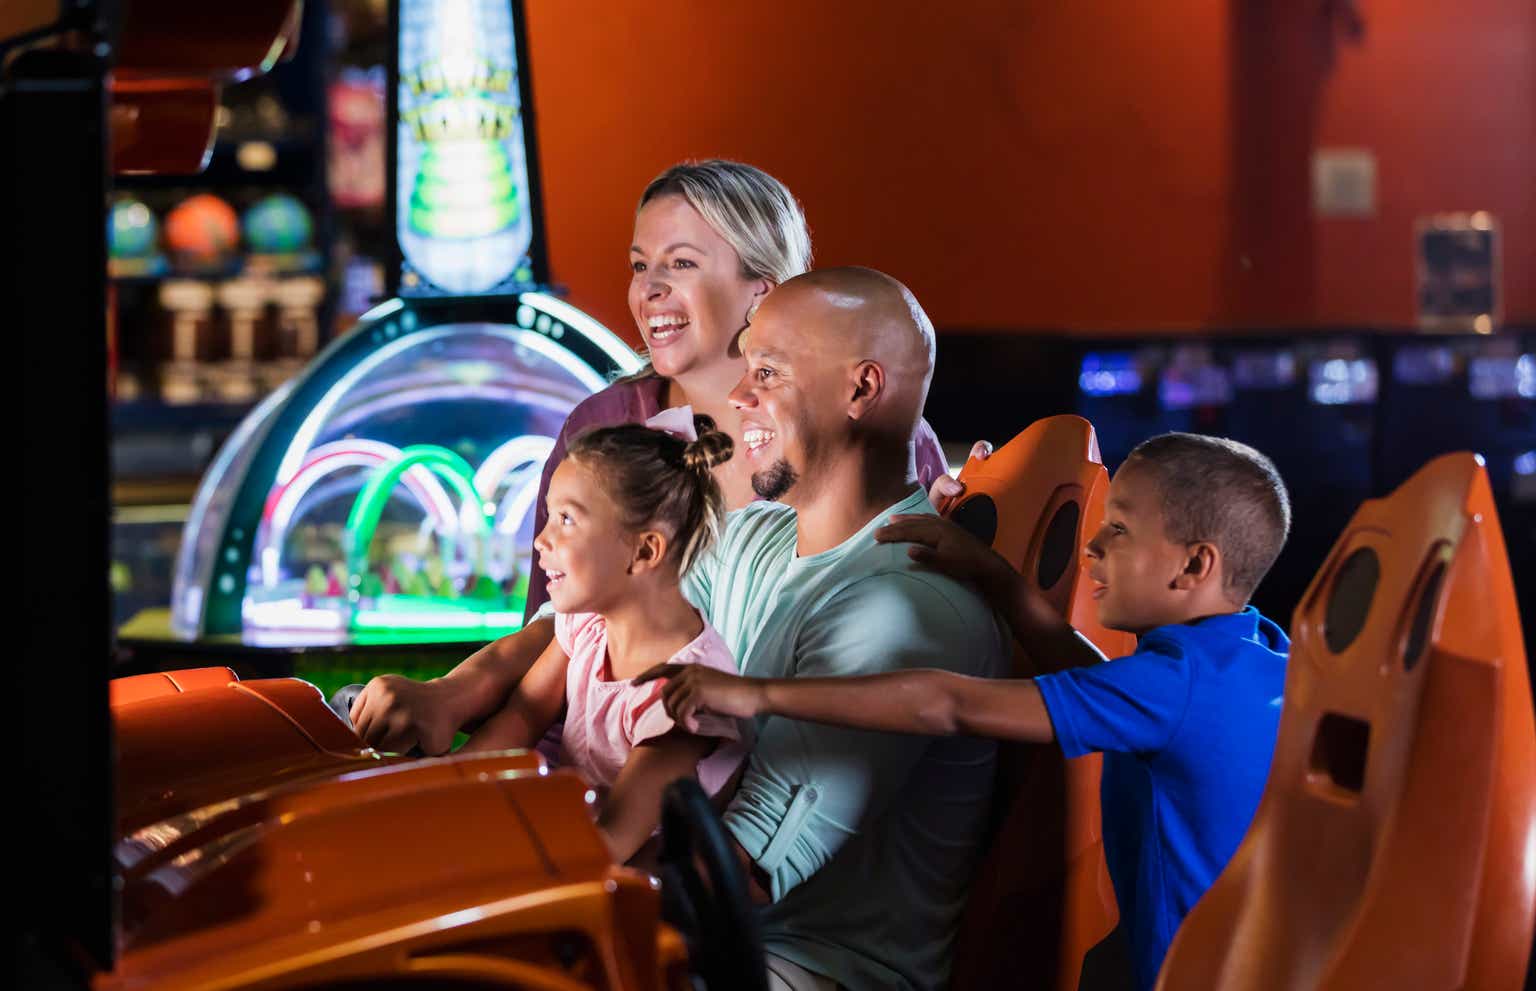 Dave & Buster's to Buy Family Entertainment Company Main Event for